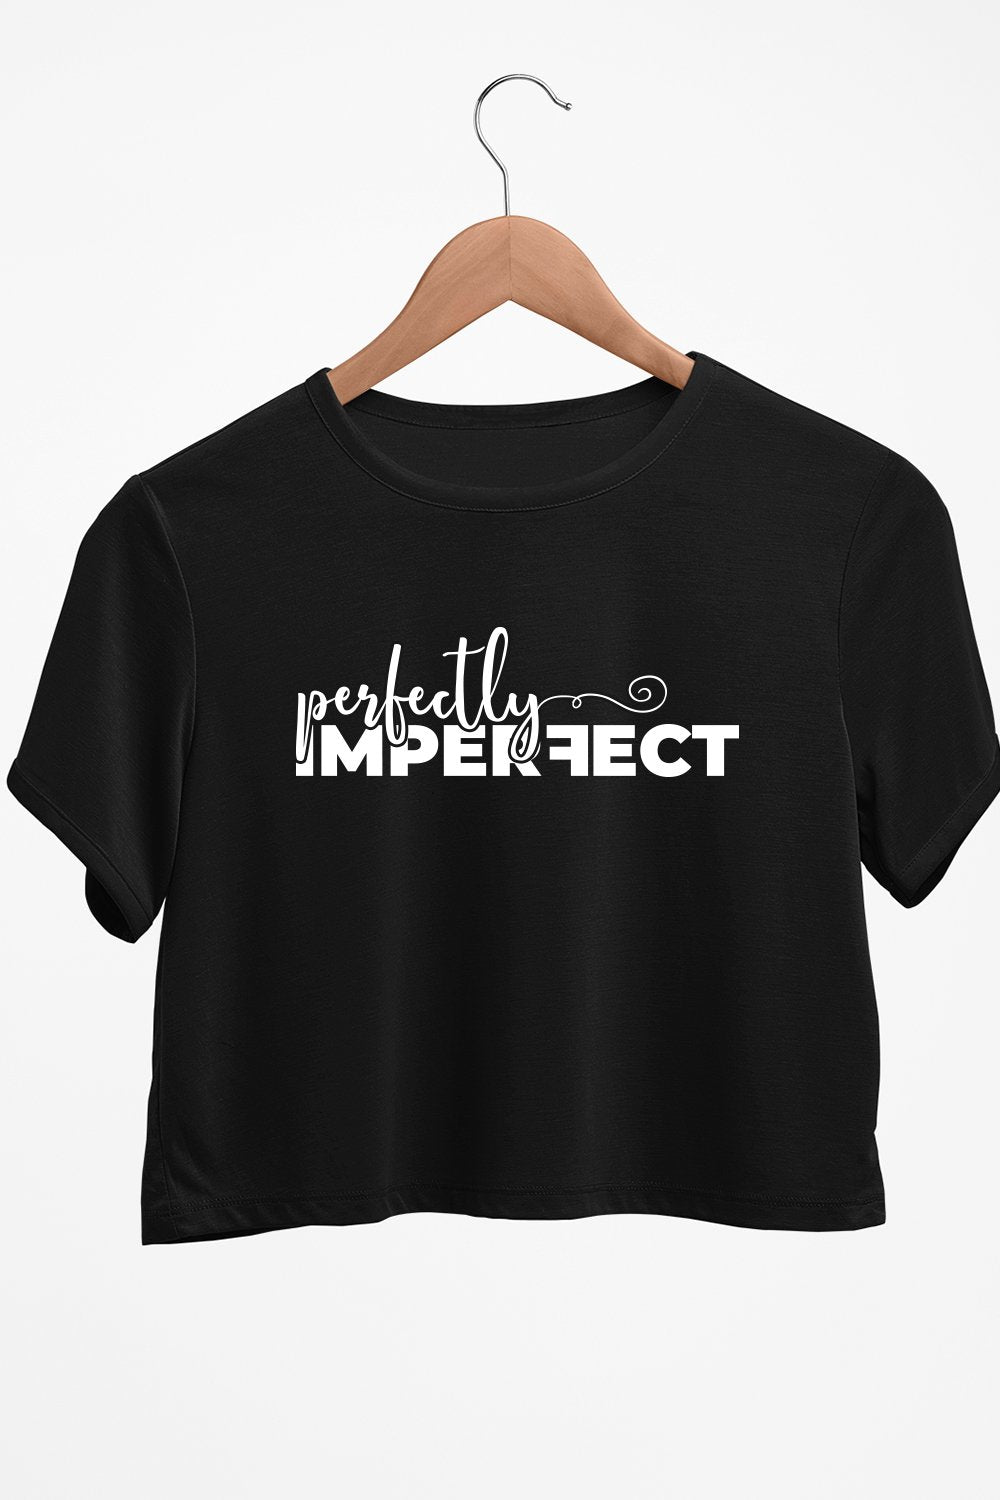 Imperfectly Perfect Graphic Printed Black Crop Top